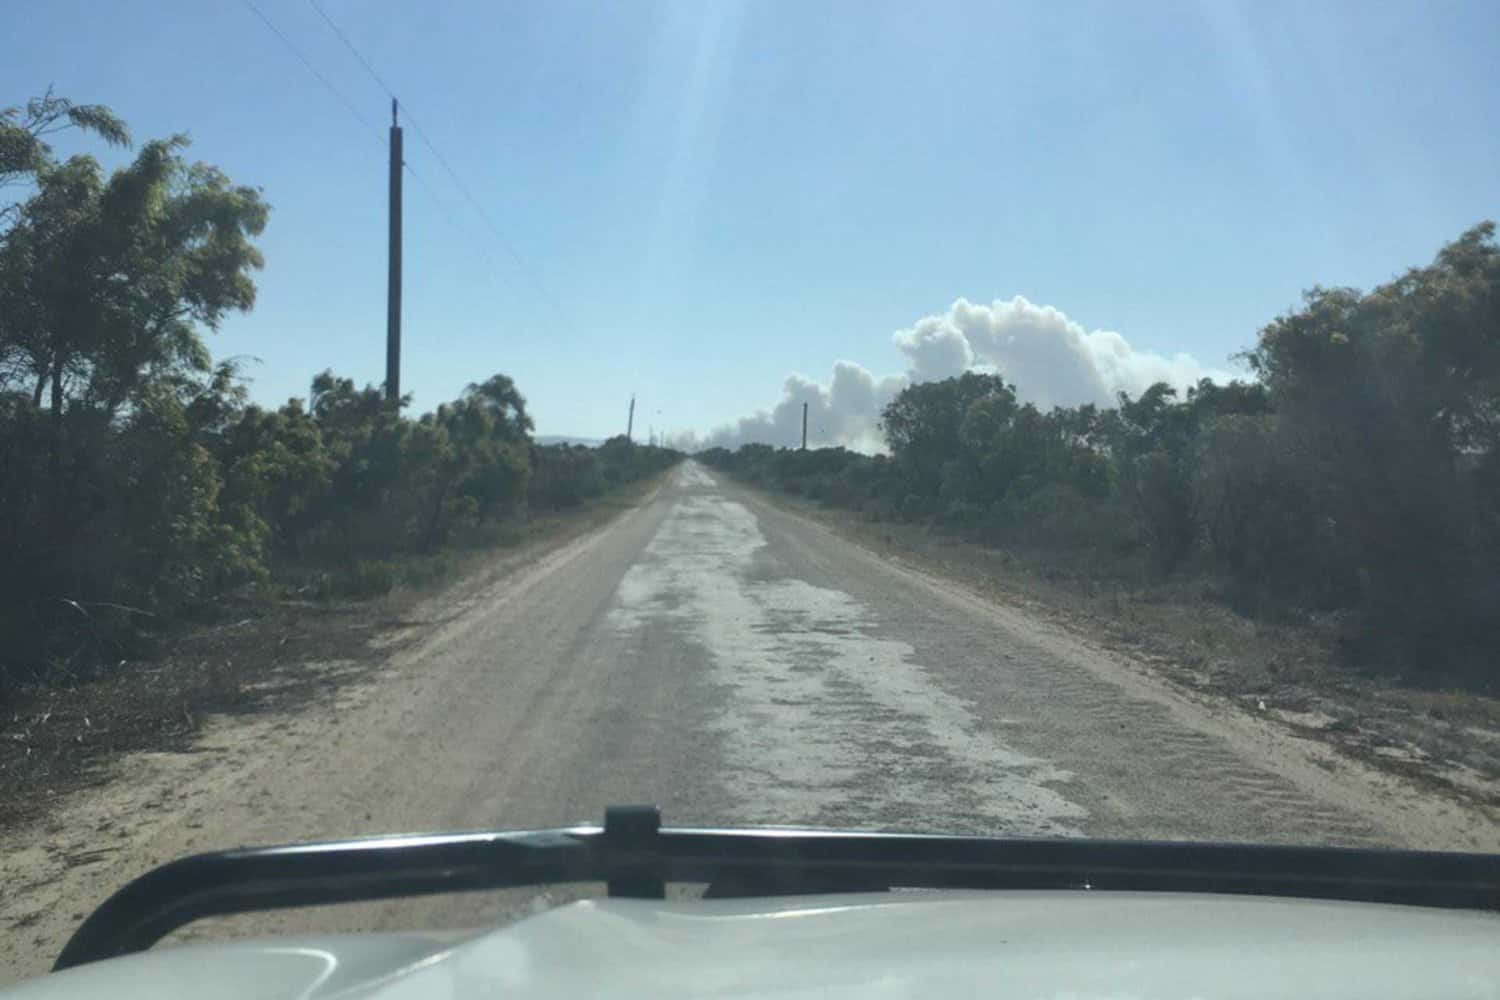 Driver's perspective of a long dirt road ahead, flanked by native shrubbery under the bright Australian sun near Margaret River, evoking a sense of adventure and exploration.